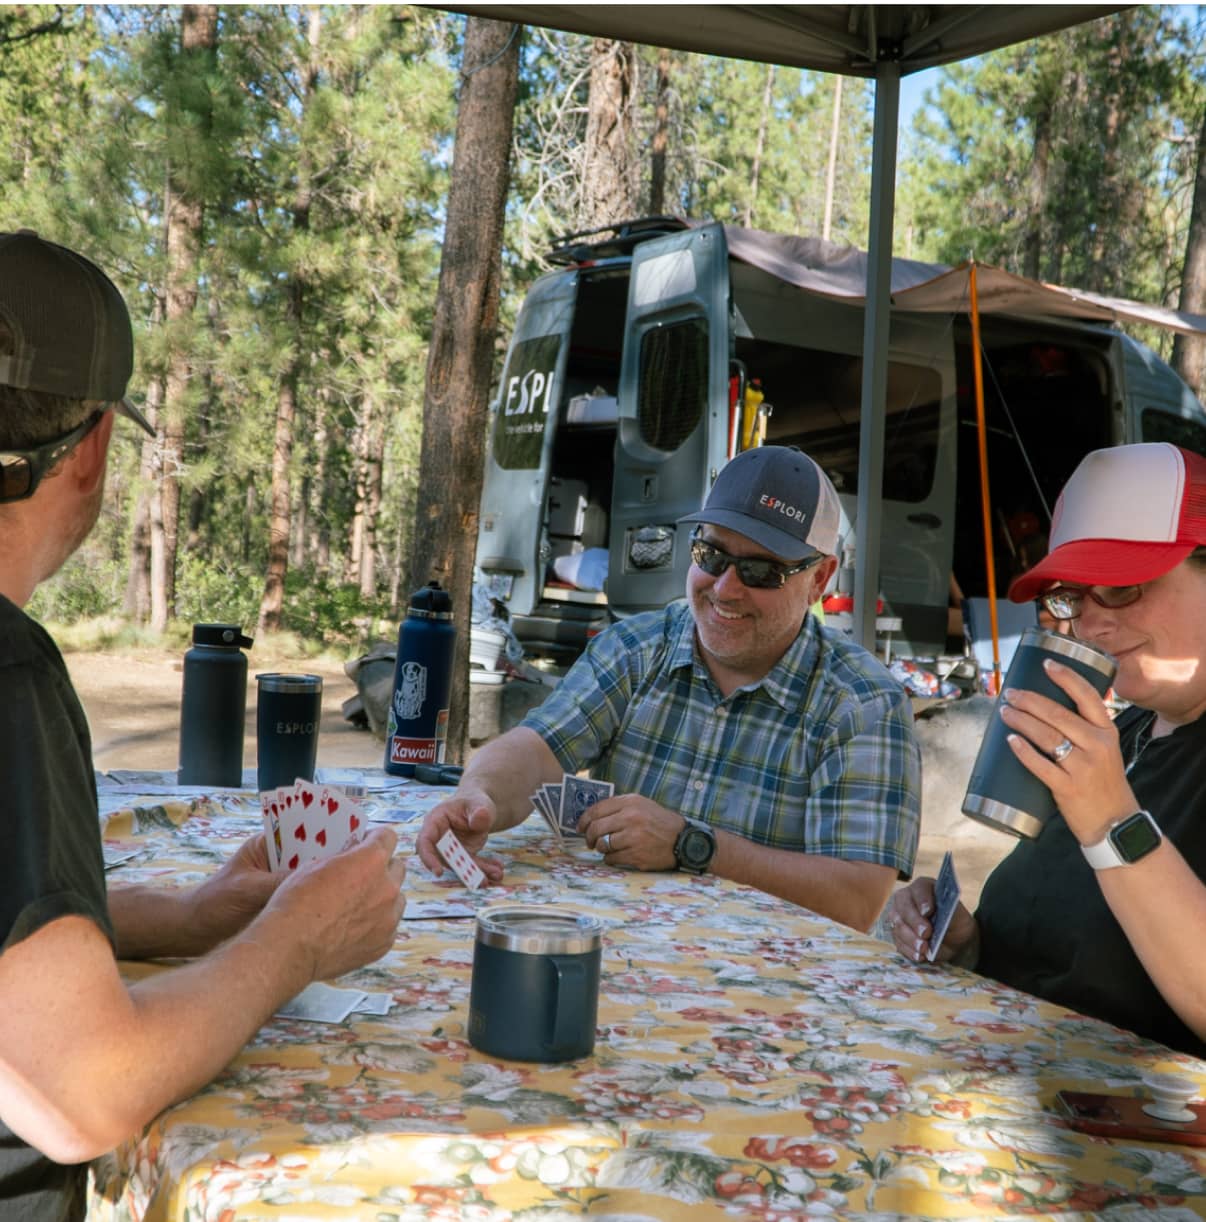 Esplori team playing cards in the forrest